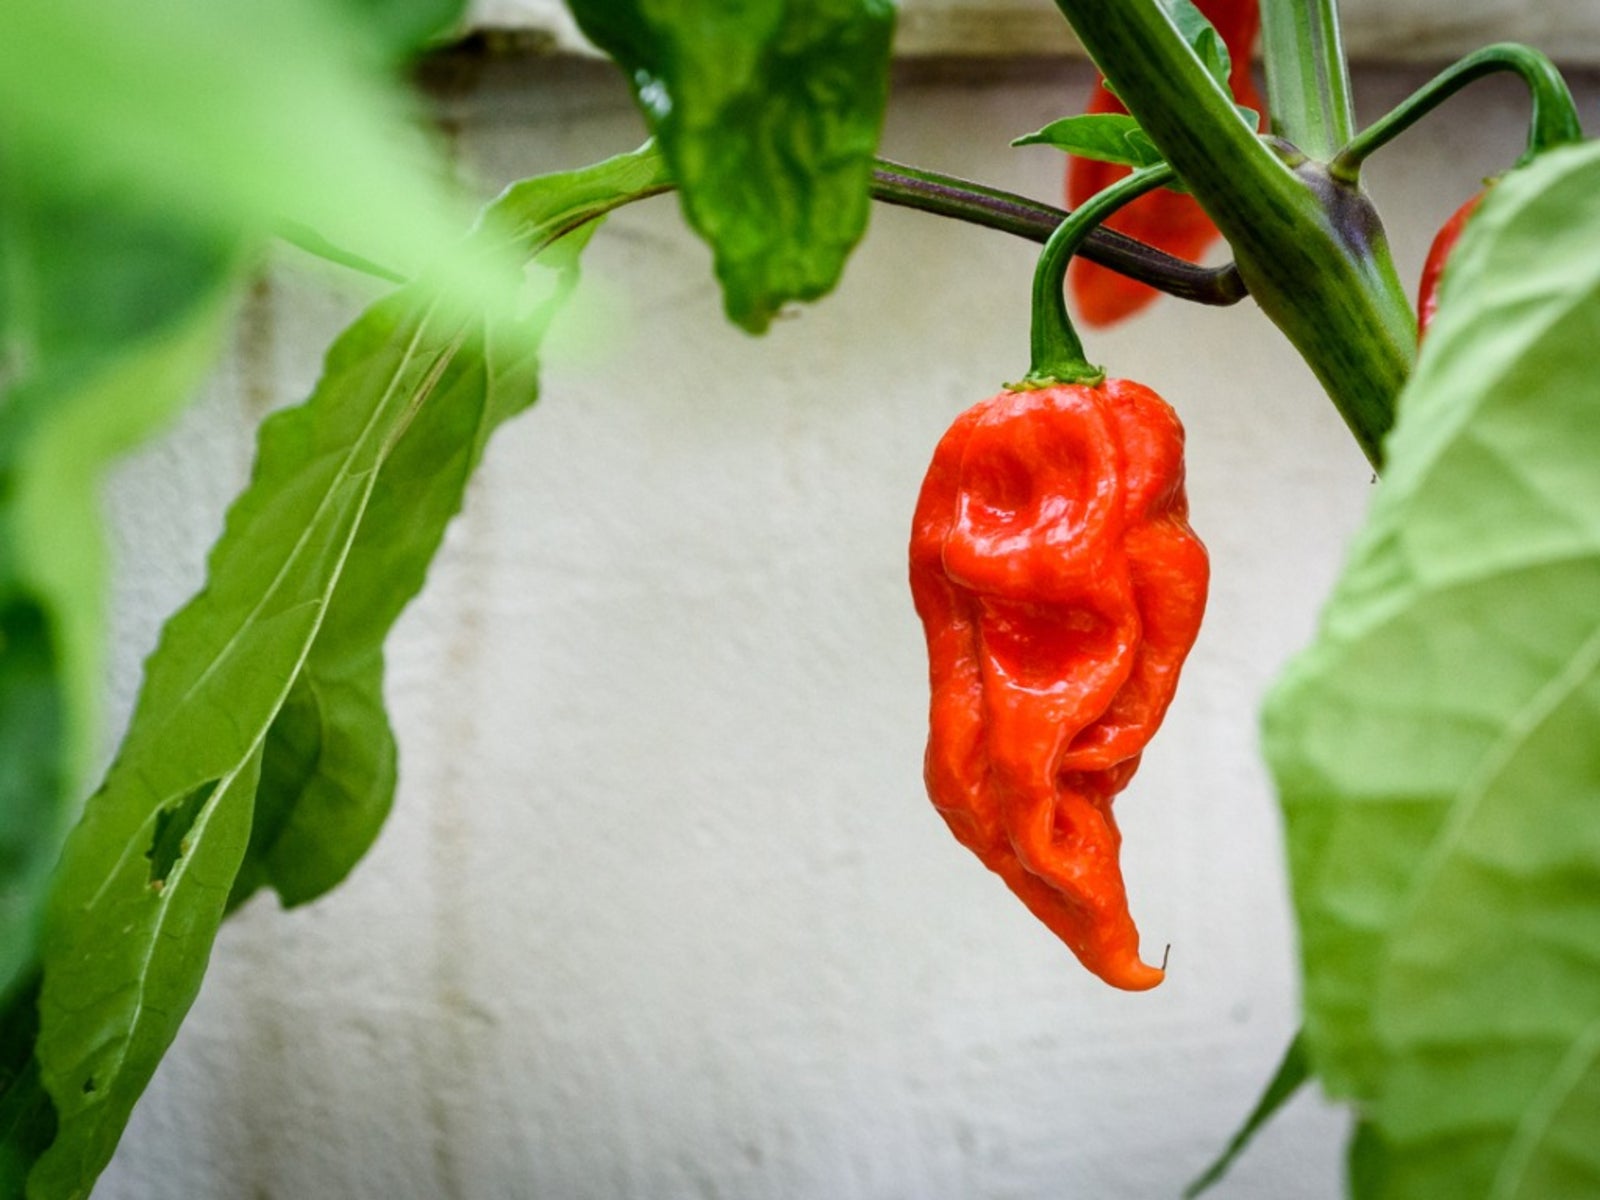 the ghost pepper is cultivated in what country